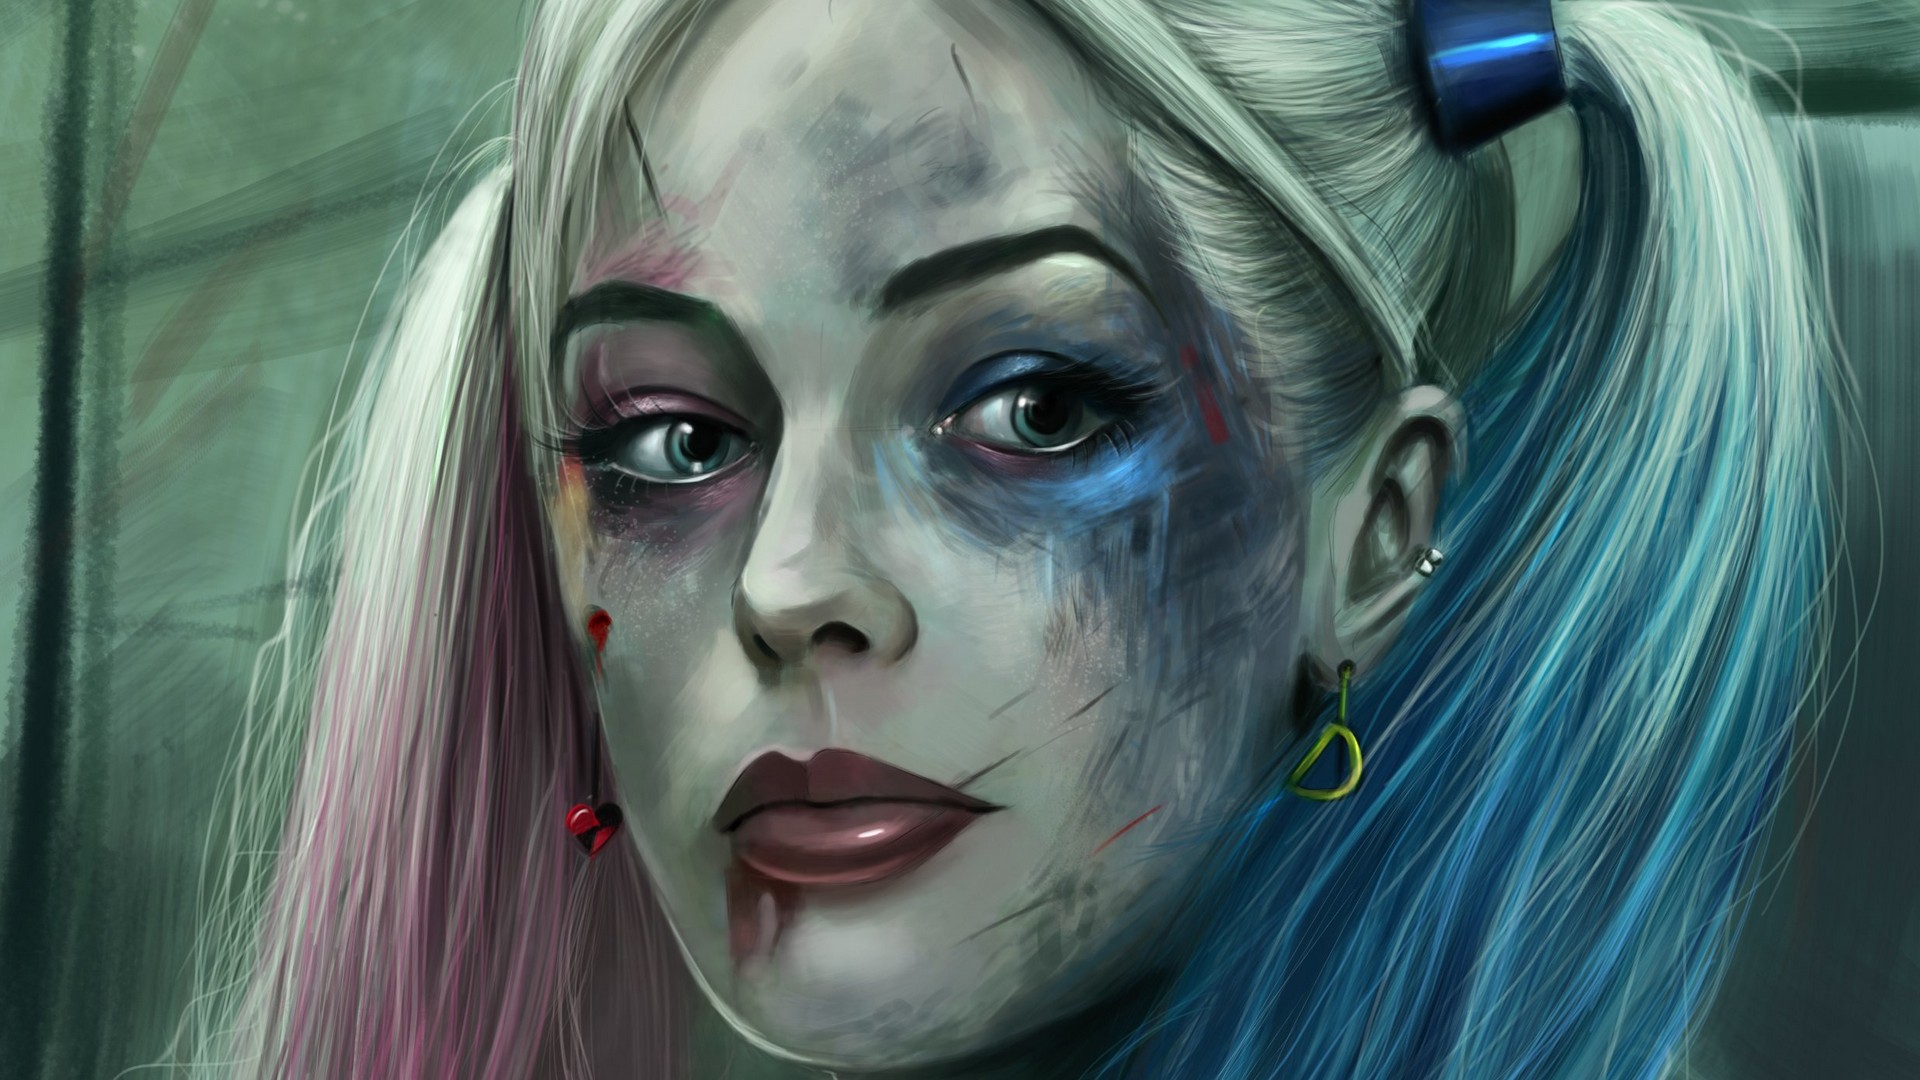 Harley Quinn Makeup Desktop Wallpaper with image resolution 1920x1080 pixel. You can use this wallpaper as background for your desktop Computer Screensavers, Android or iPhone smartphones